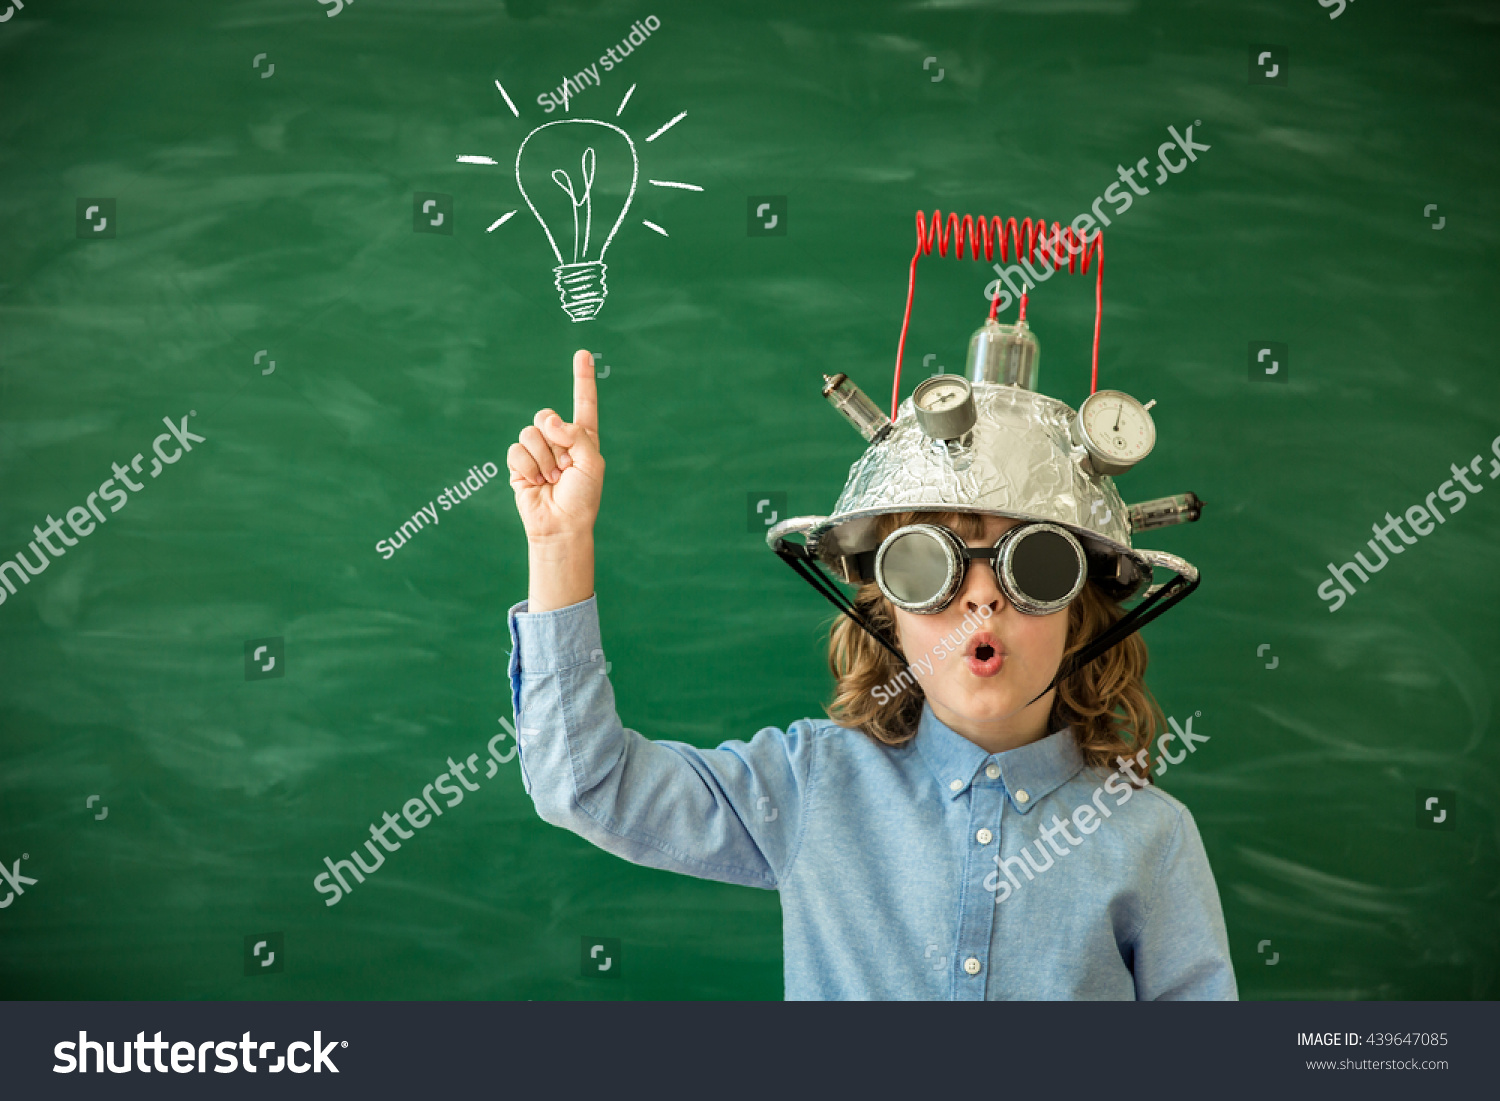 Back to school. Schoolchild with virtual reality headset. Child in class. Funny kid against blackboard. Nerd kid having fun. Geek child with VR glasses. Innovation technology and education concept #439647085